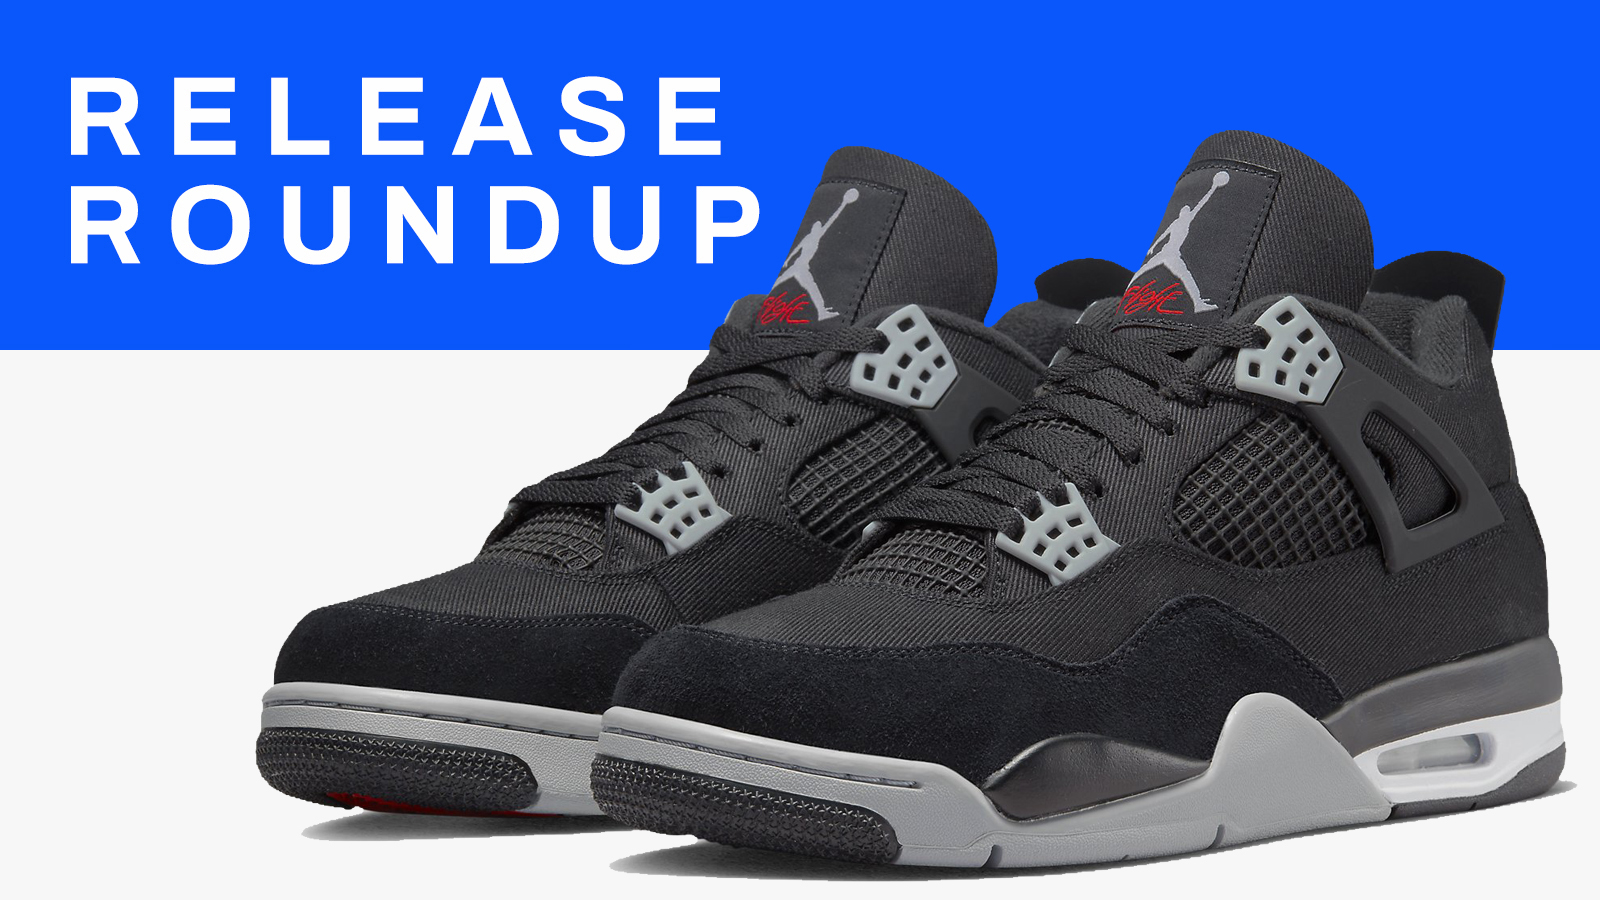 Sneaker Fortress - News & Reviews On The Latest Releases